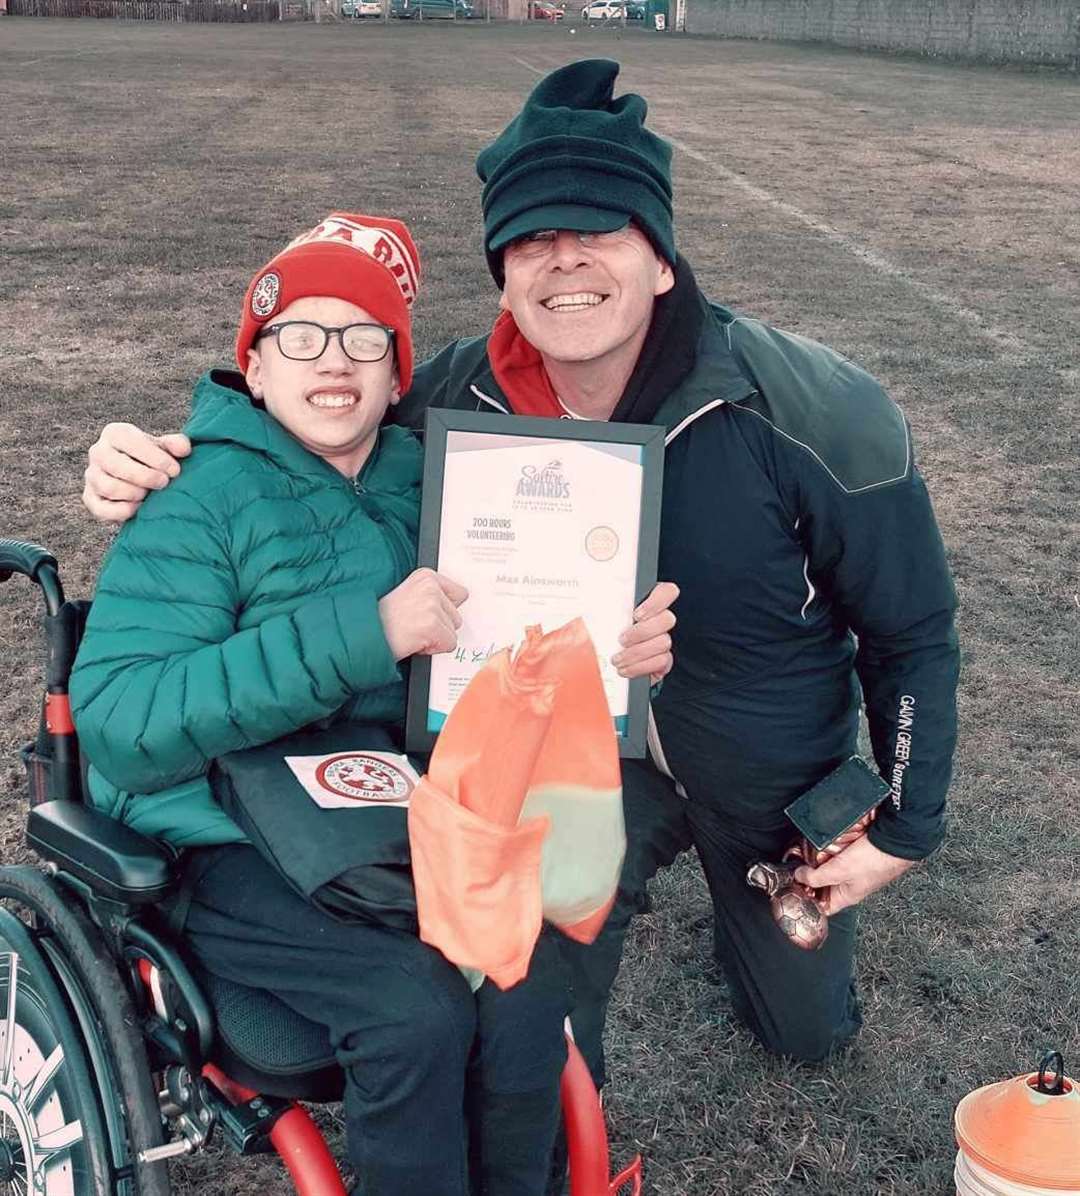 Brora Rangers fan and volunteer referee Max Ainsworth was presented with a Saltire Ascent 200-hour certificate. Photo: Justine Clark